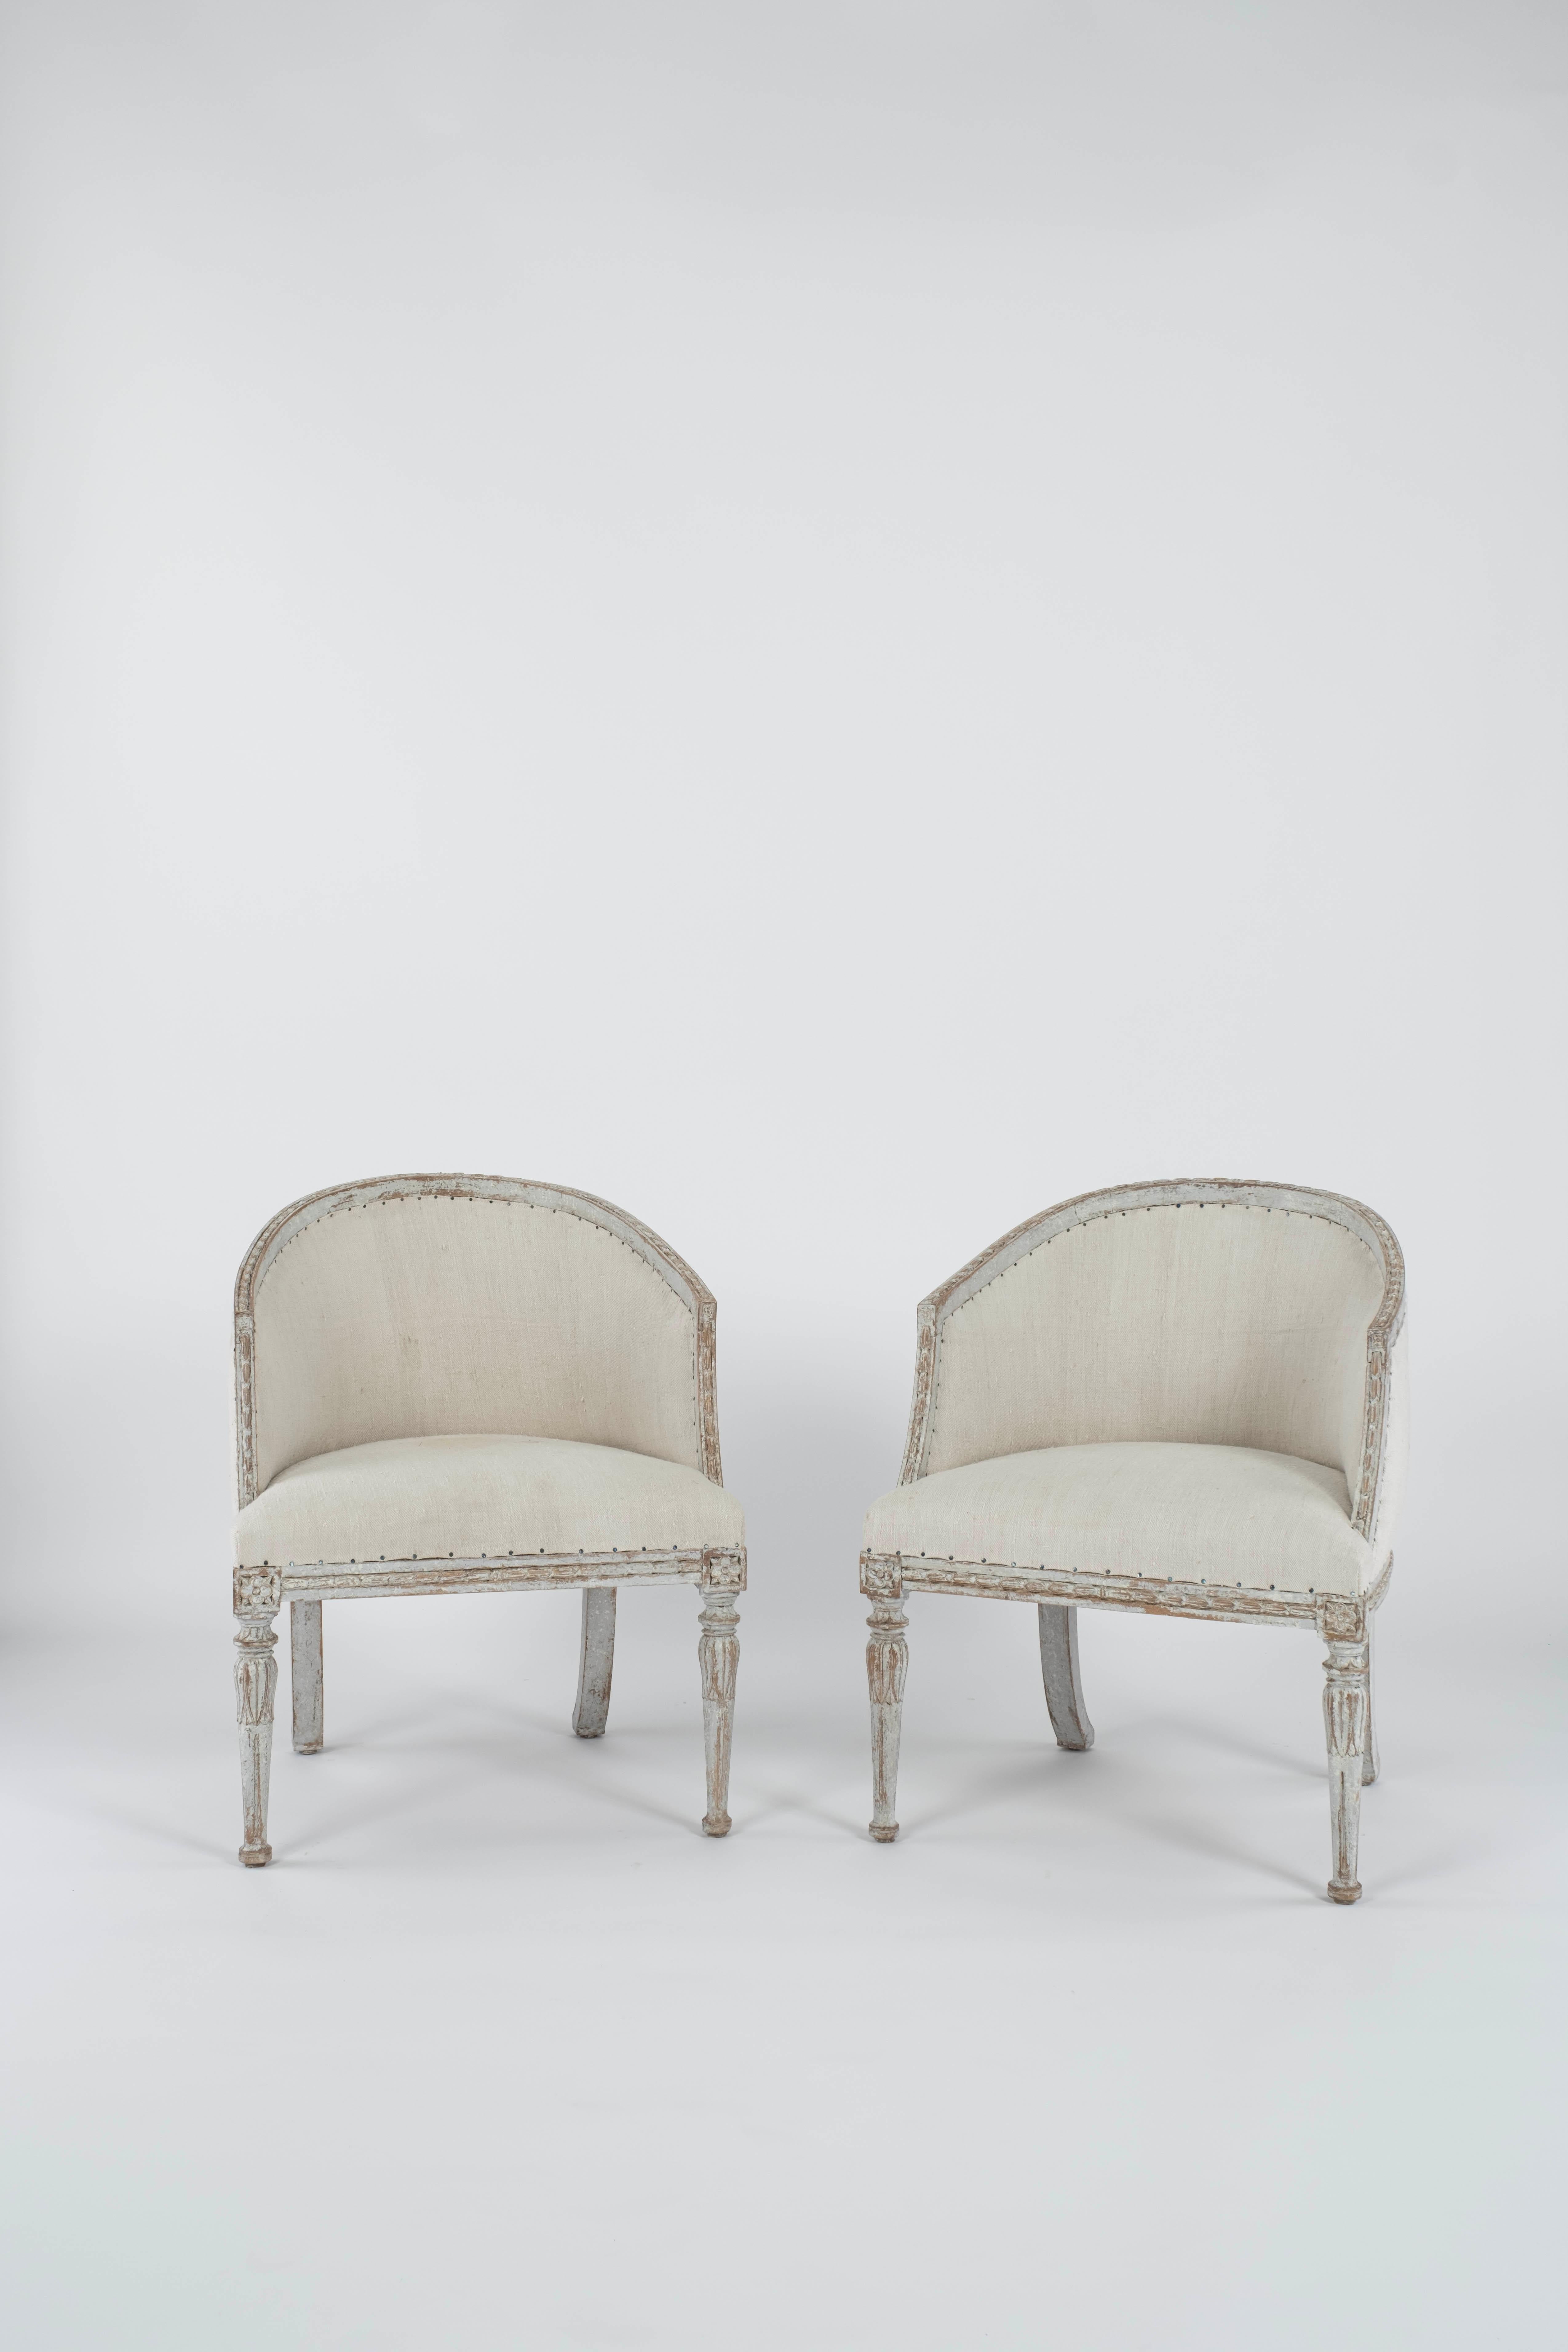 Pair of 19th c. Gustavian bucket chairs with original paint.  